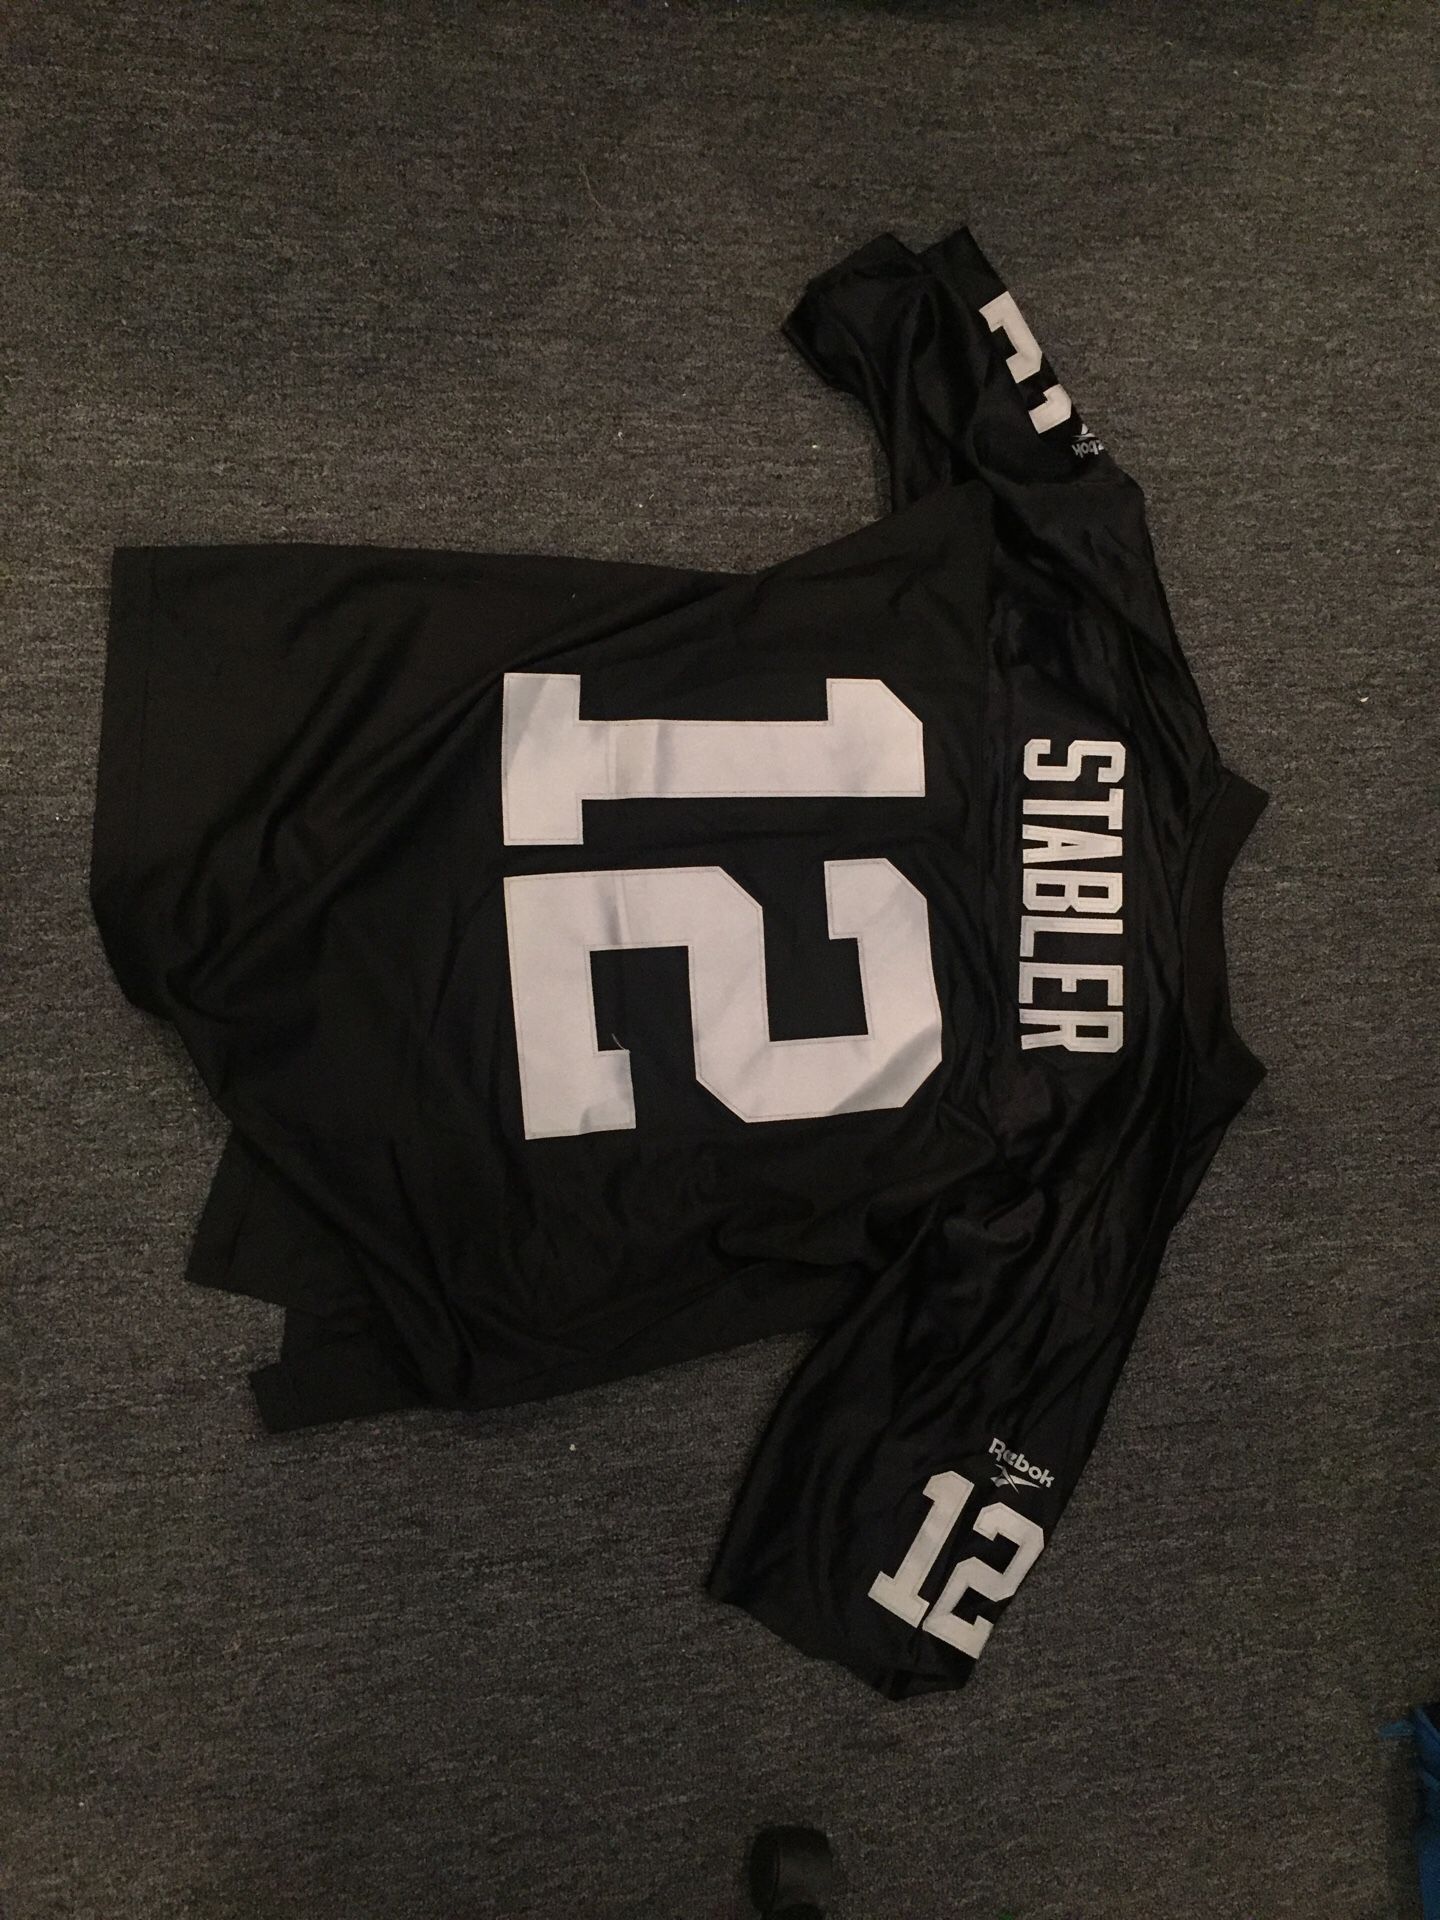 Raiders Stabler NFL Throwback Jersey New